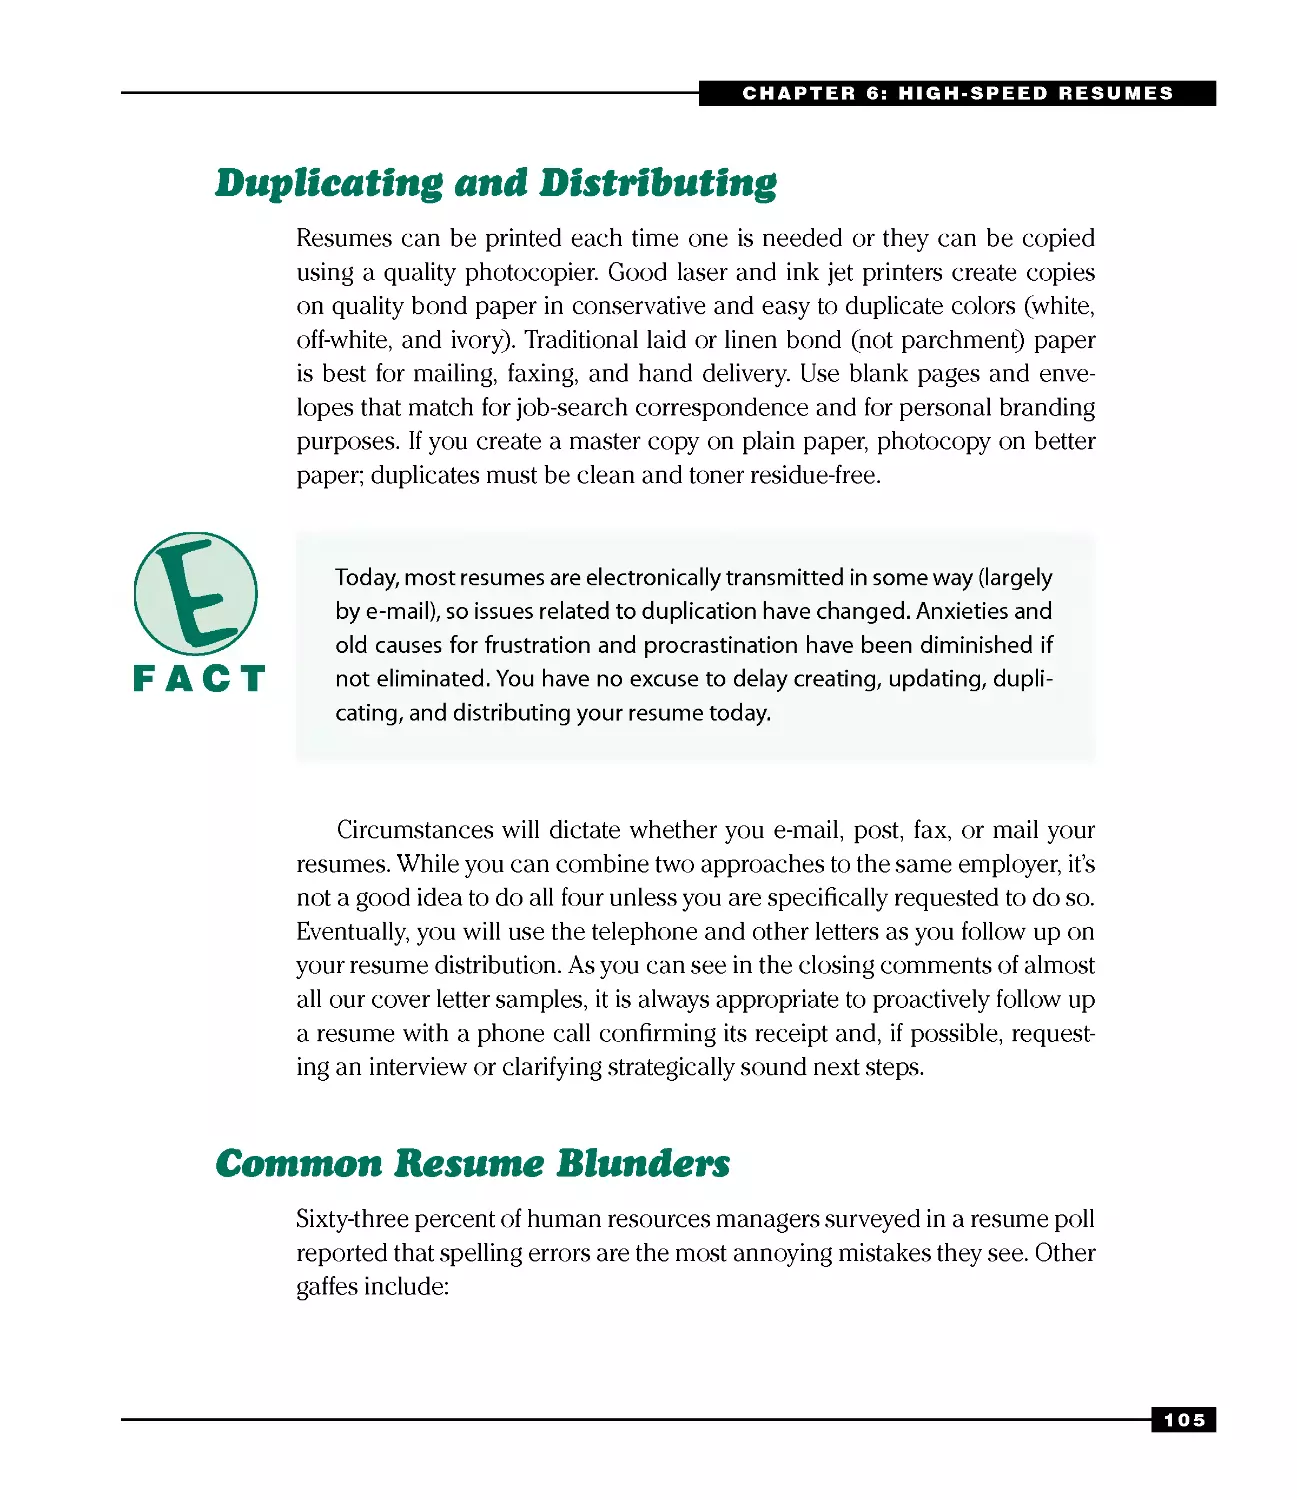 Duplicating and Distributing
Common Resume Blunders